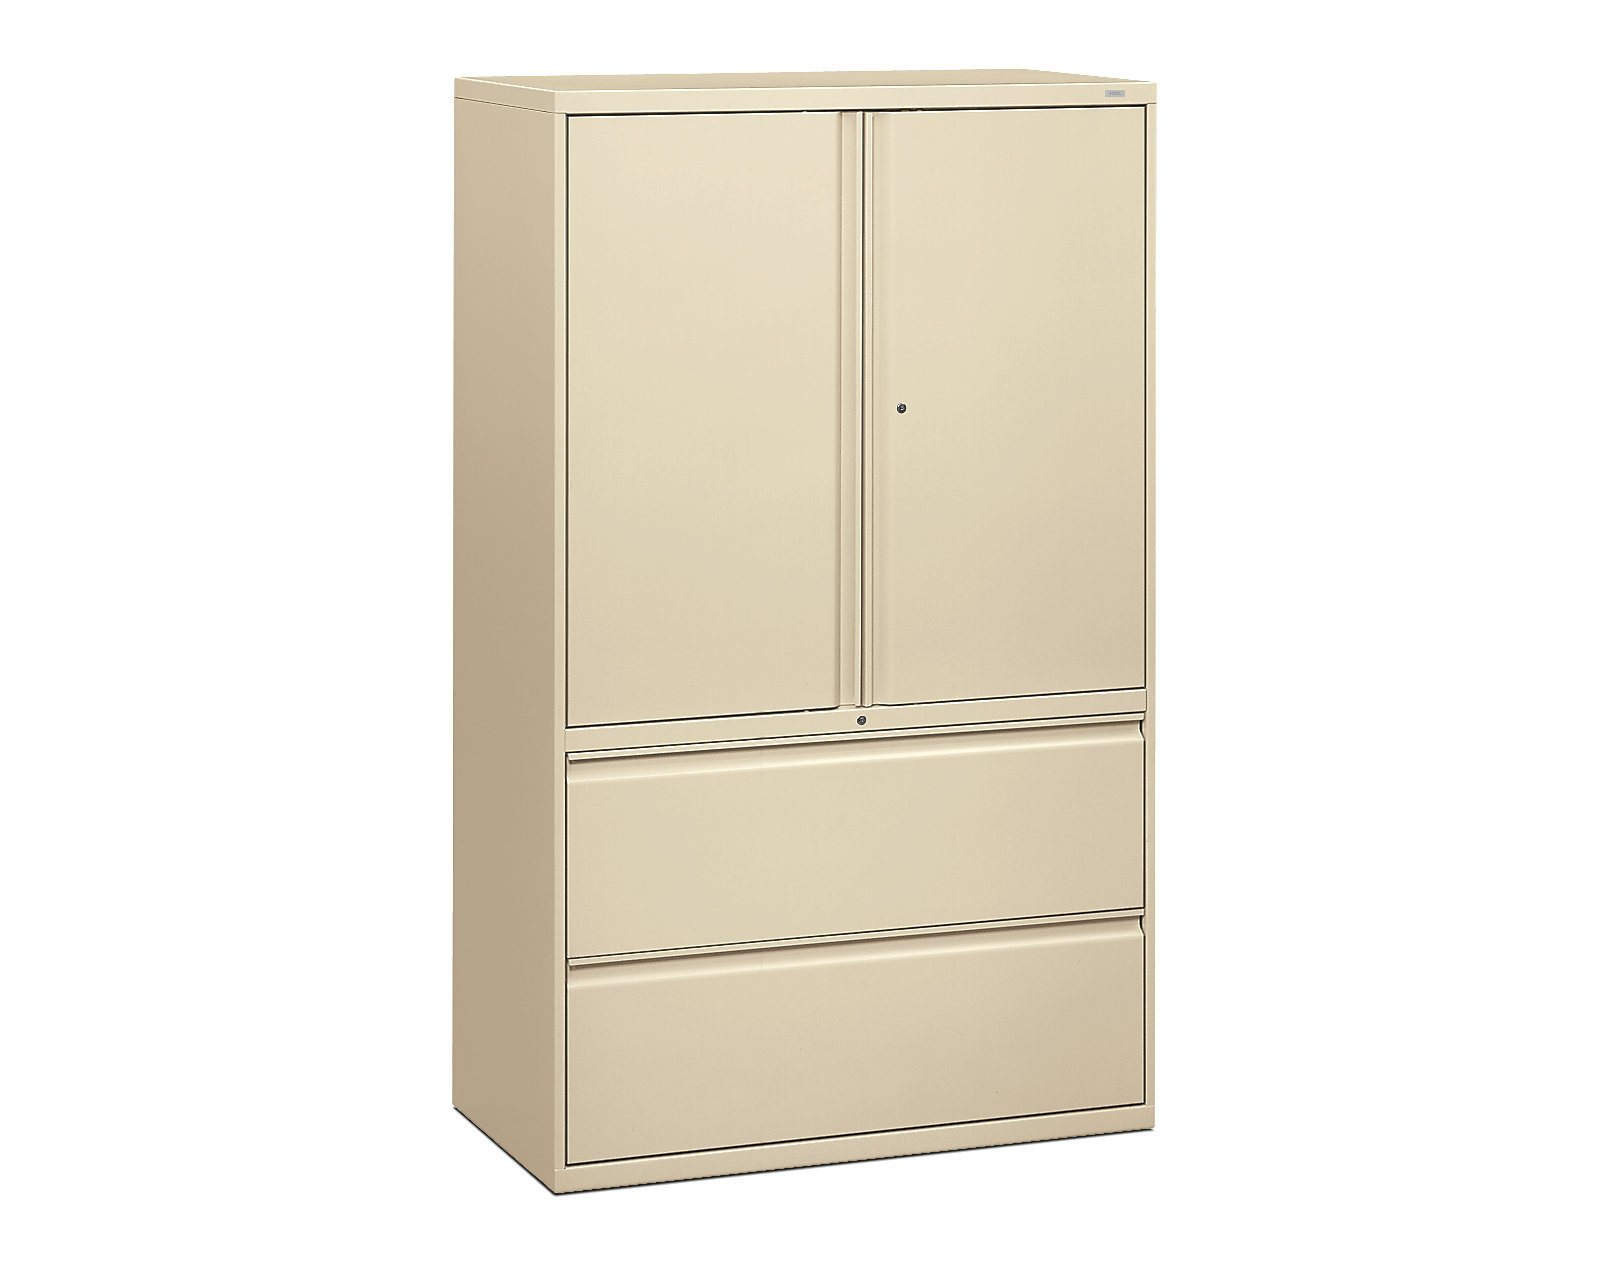 Baige Color up Cabinet and Down Lateral File 2 Drawer Cabinet